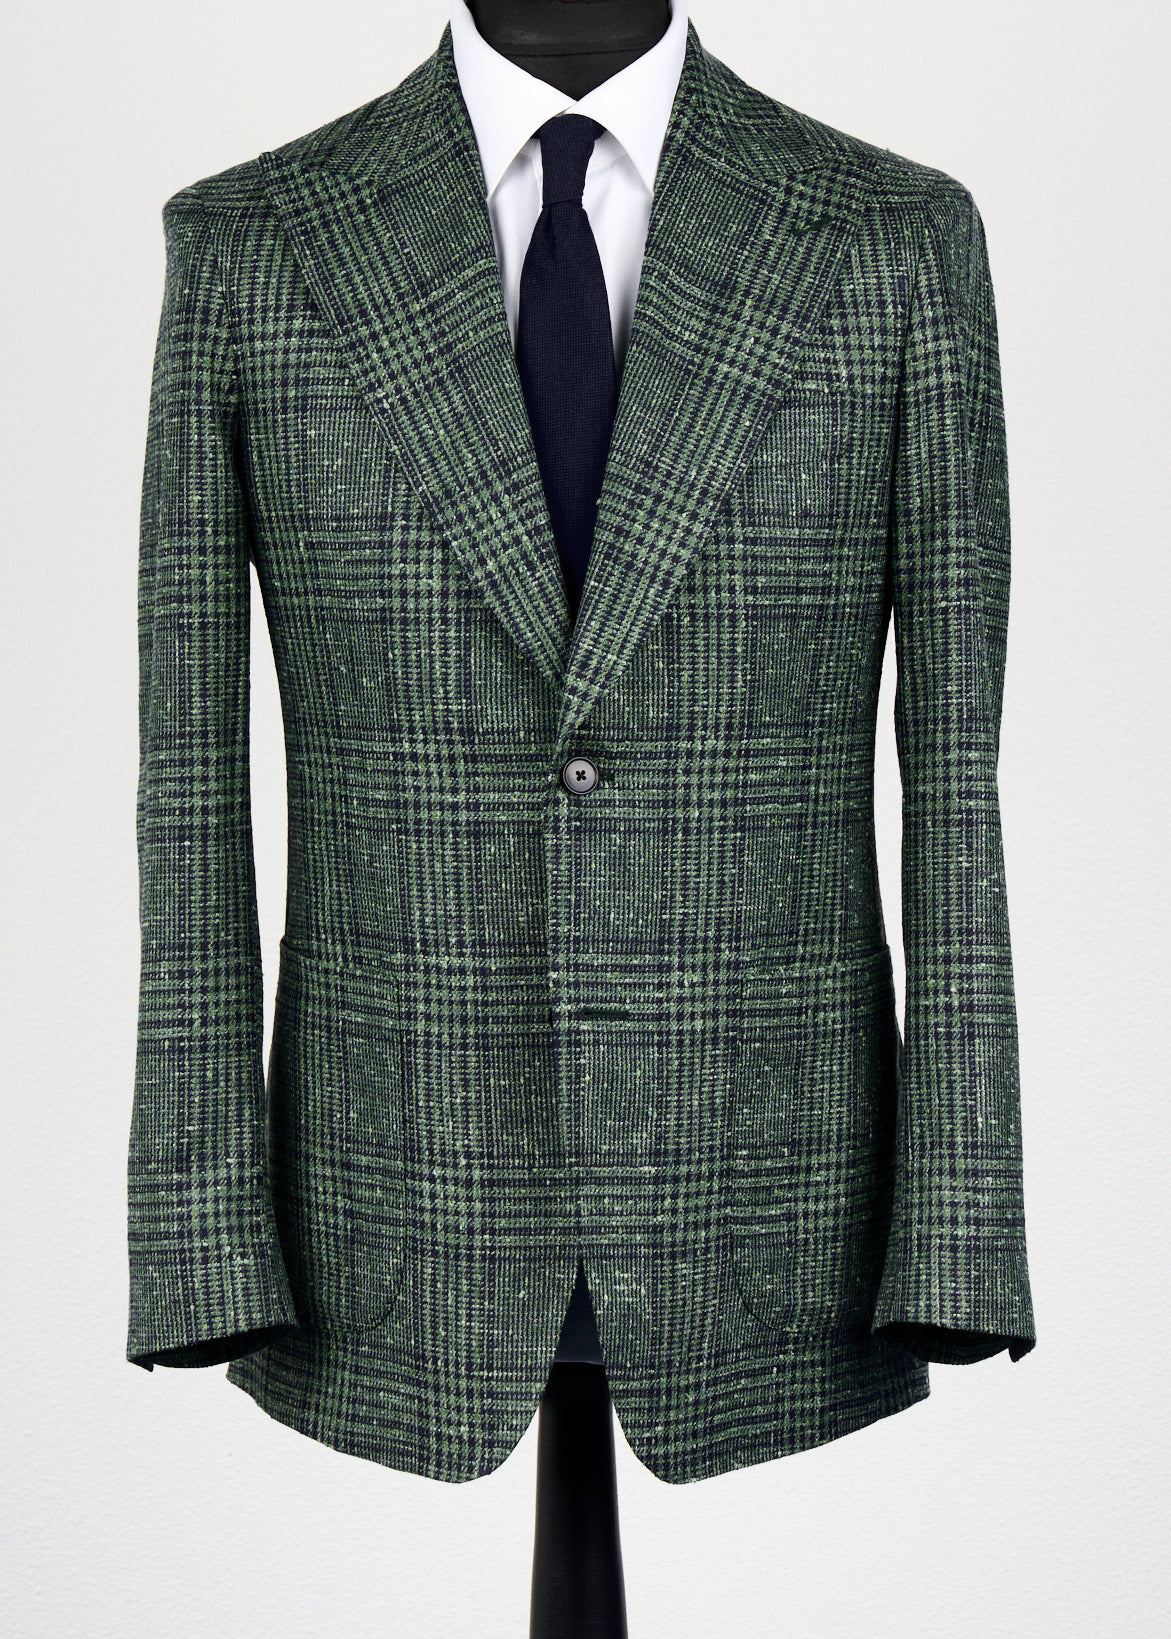 New SUITREVIEW Elmhurst Peak Green/Blue Check Wool, Silk, Linen Blazer - Most Sizes Available